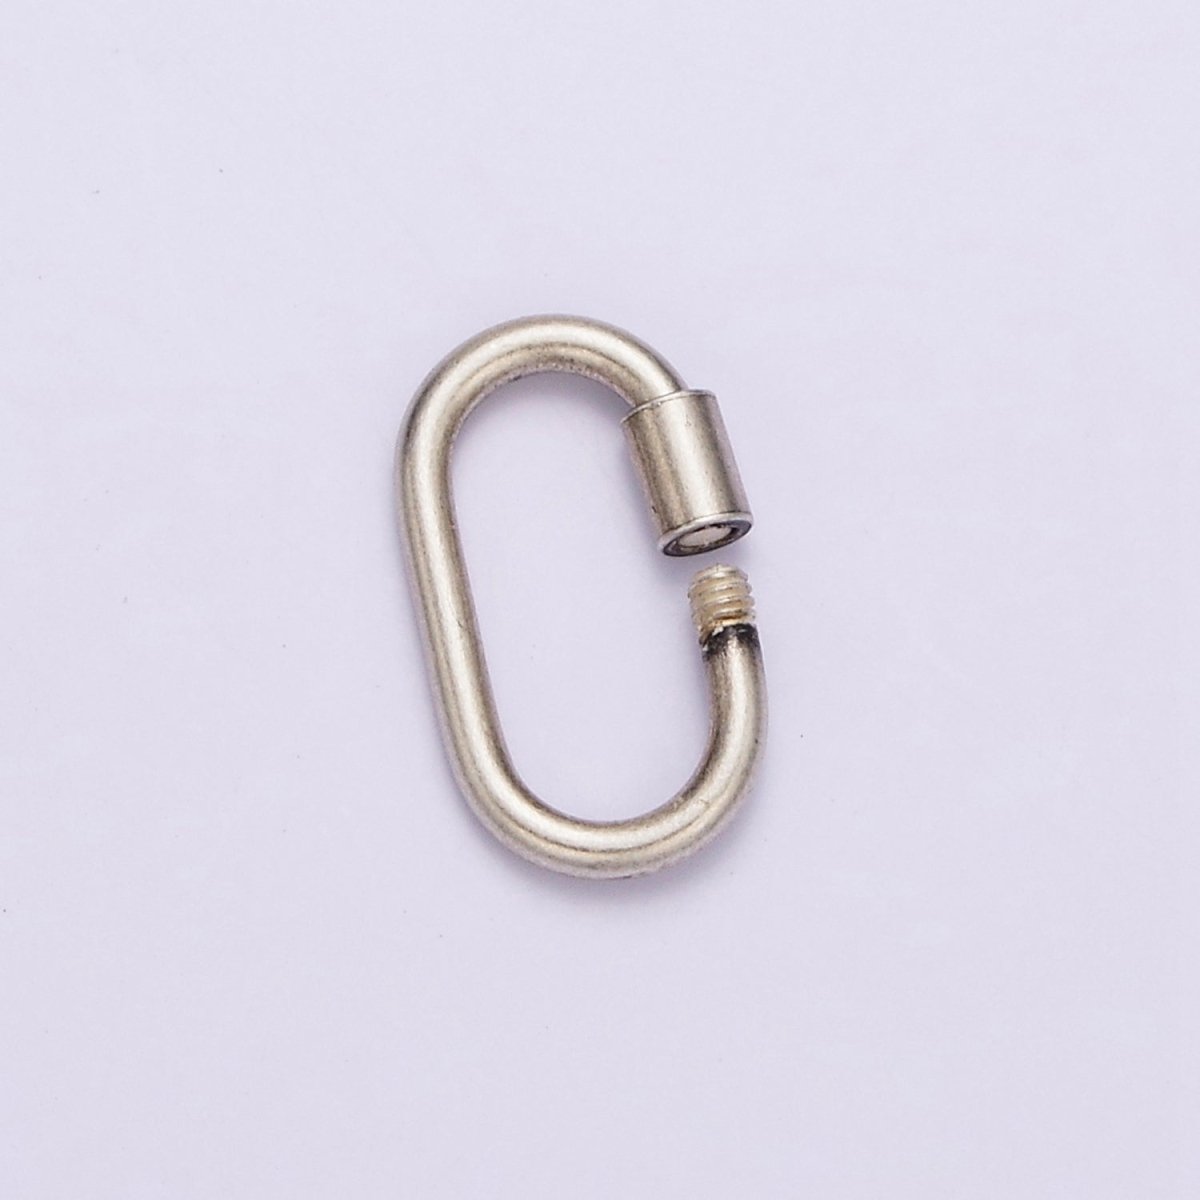 Antique Silver Carabiner s925 Sterling Silver Dainty Screw Lock Clasp for Jewelry Making SL-299 - DLUXCA